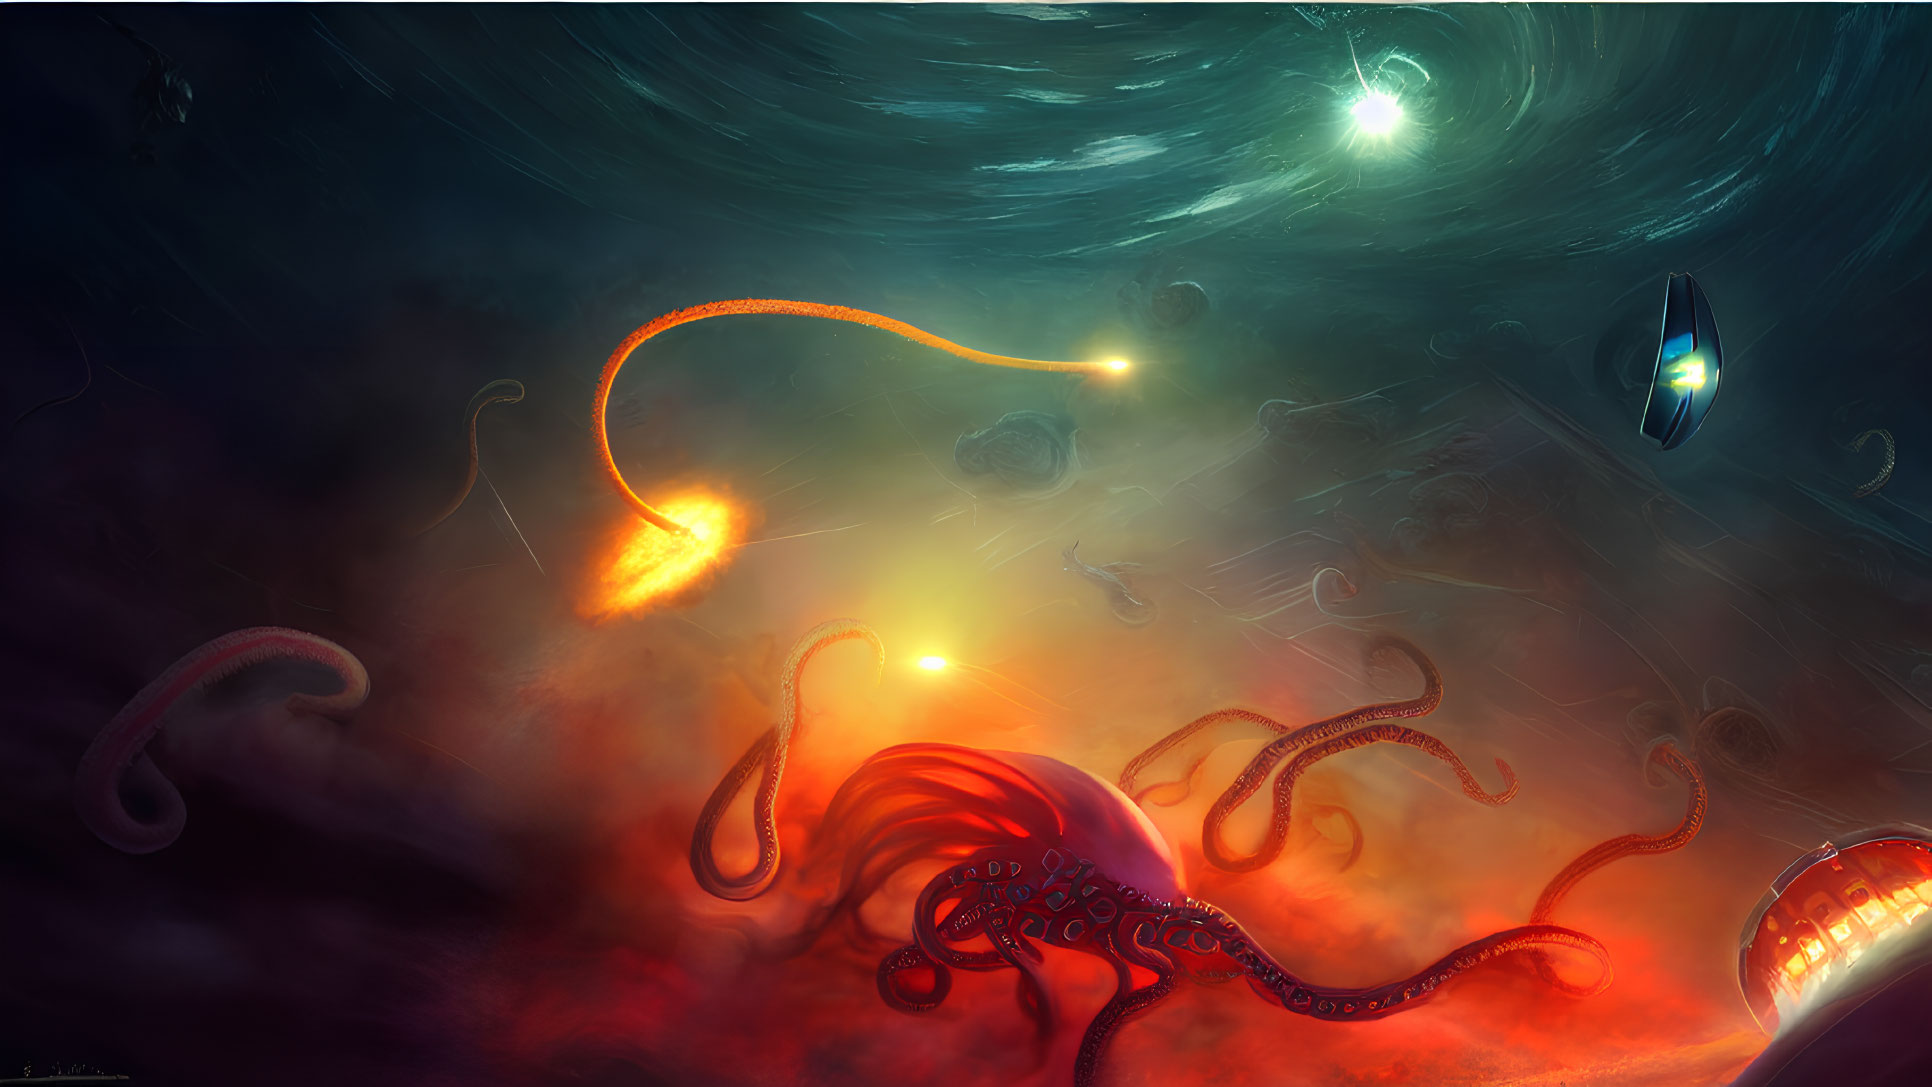 Colorful cosmic scene with red octopus-like creature, celestial bodies, nebulas, and spaceship